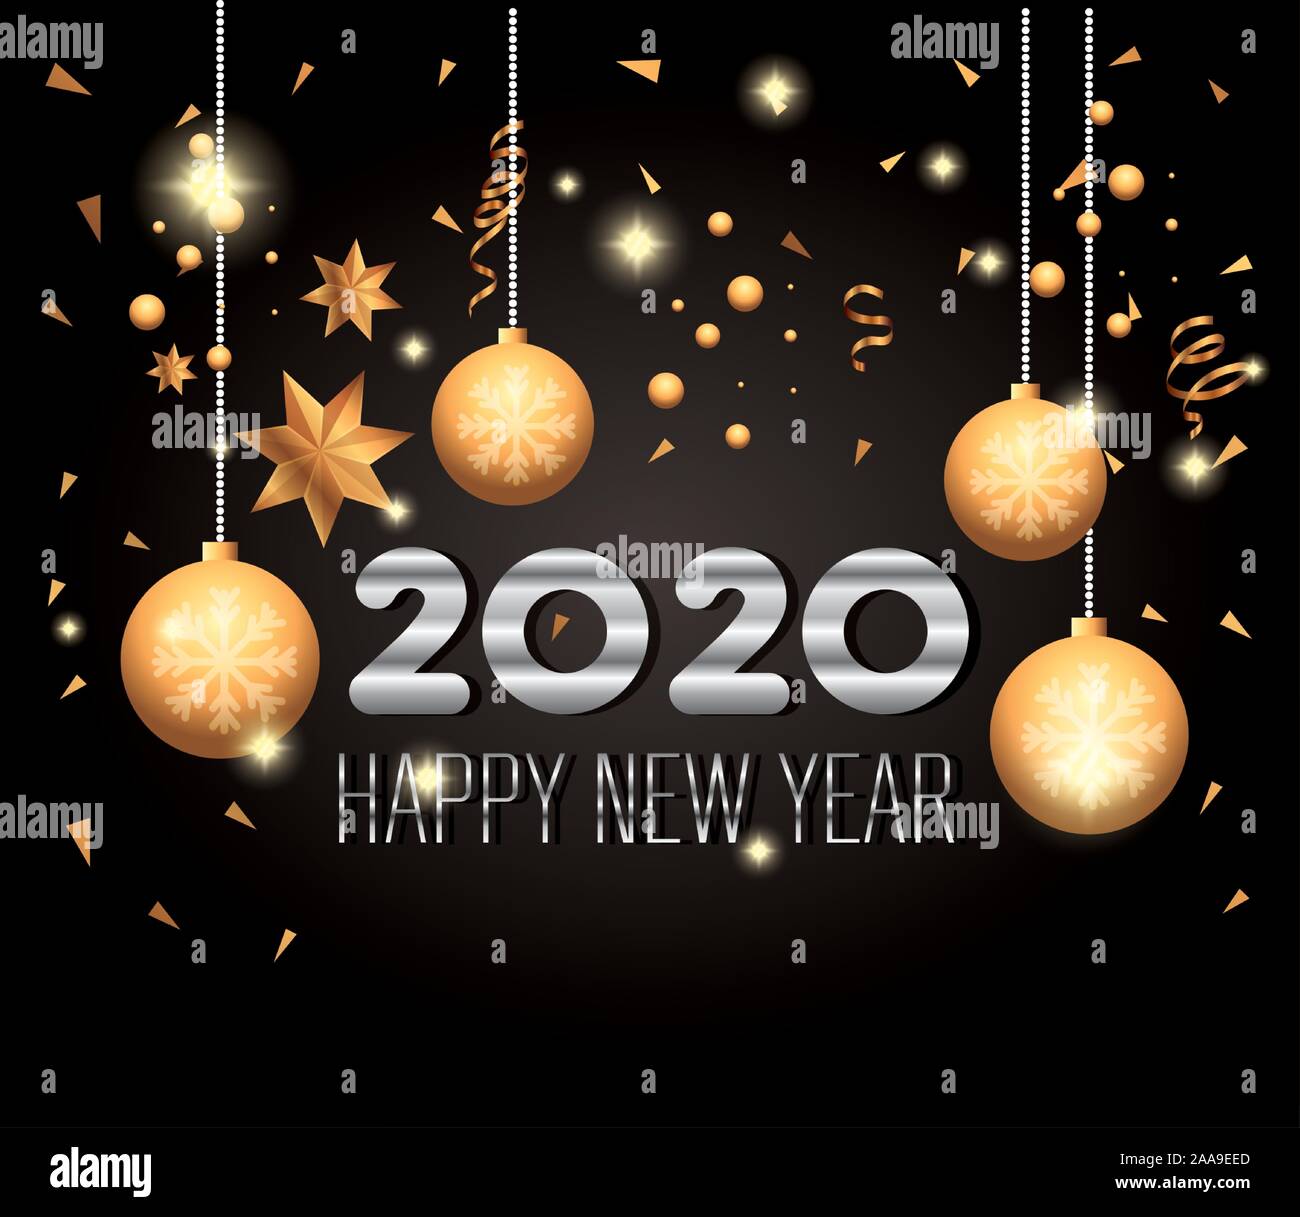 poster of happy new year 2020 with decoration balls hanging Stock ...